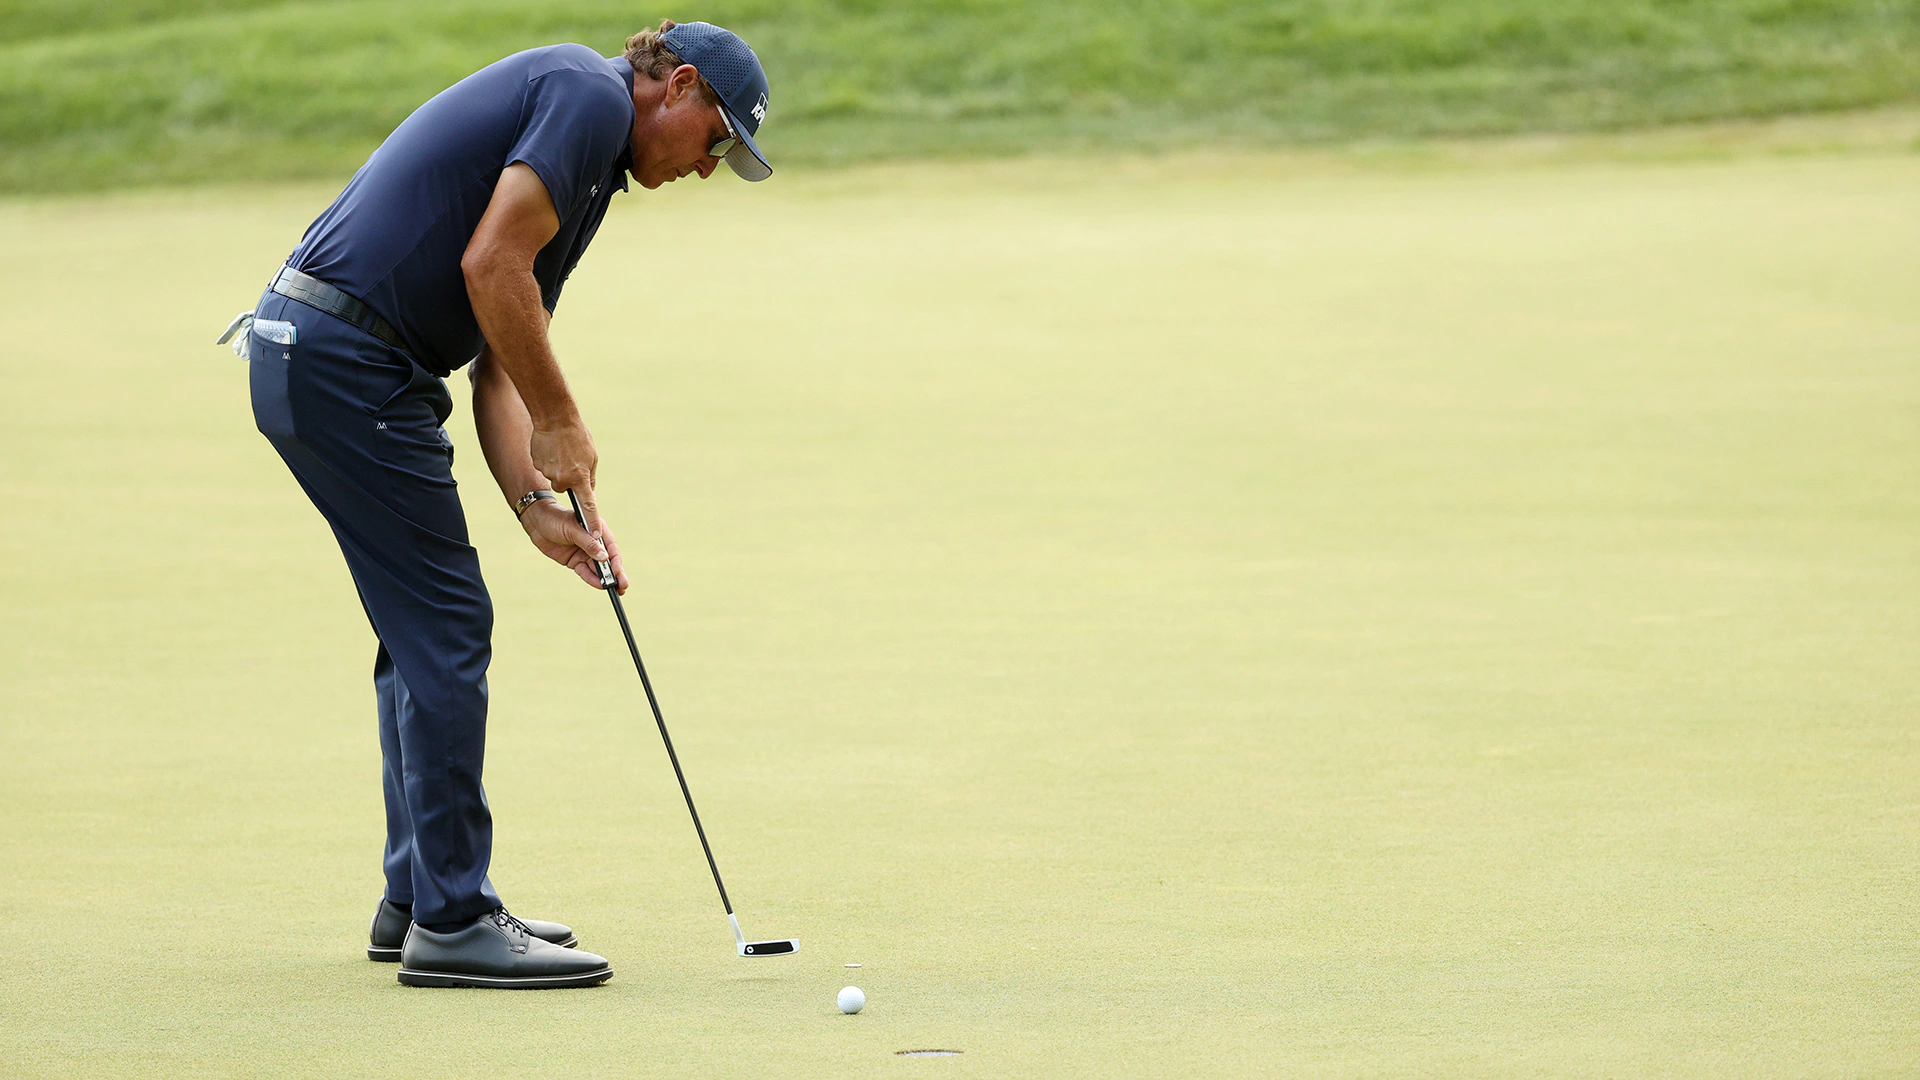 Your TV isn’t buffering: Phil Mickelson is pausing during his putting stroke